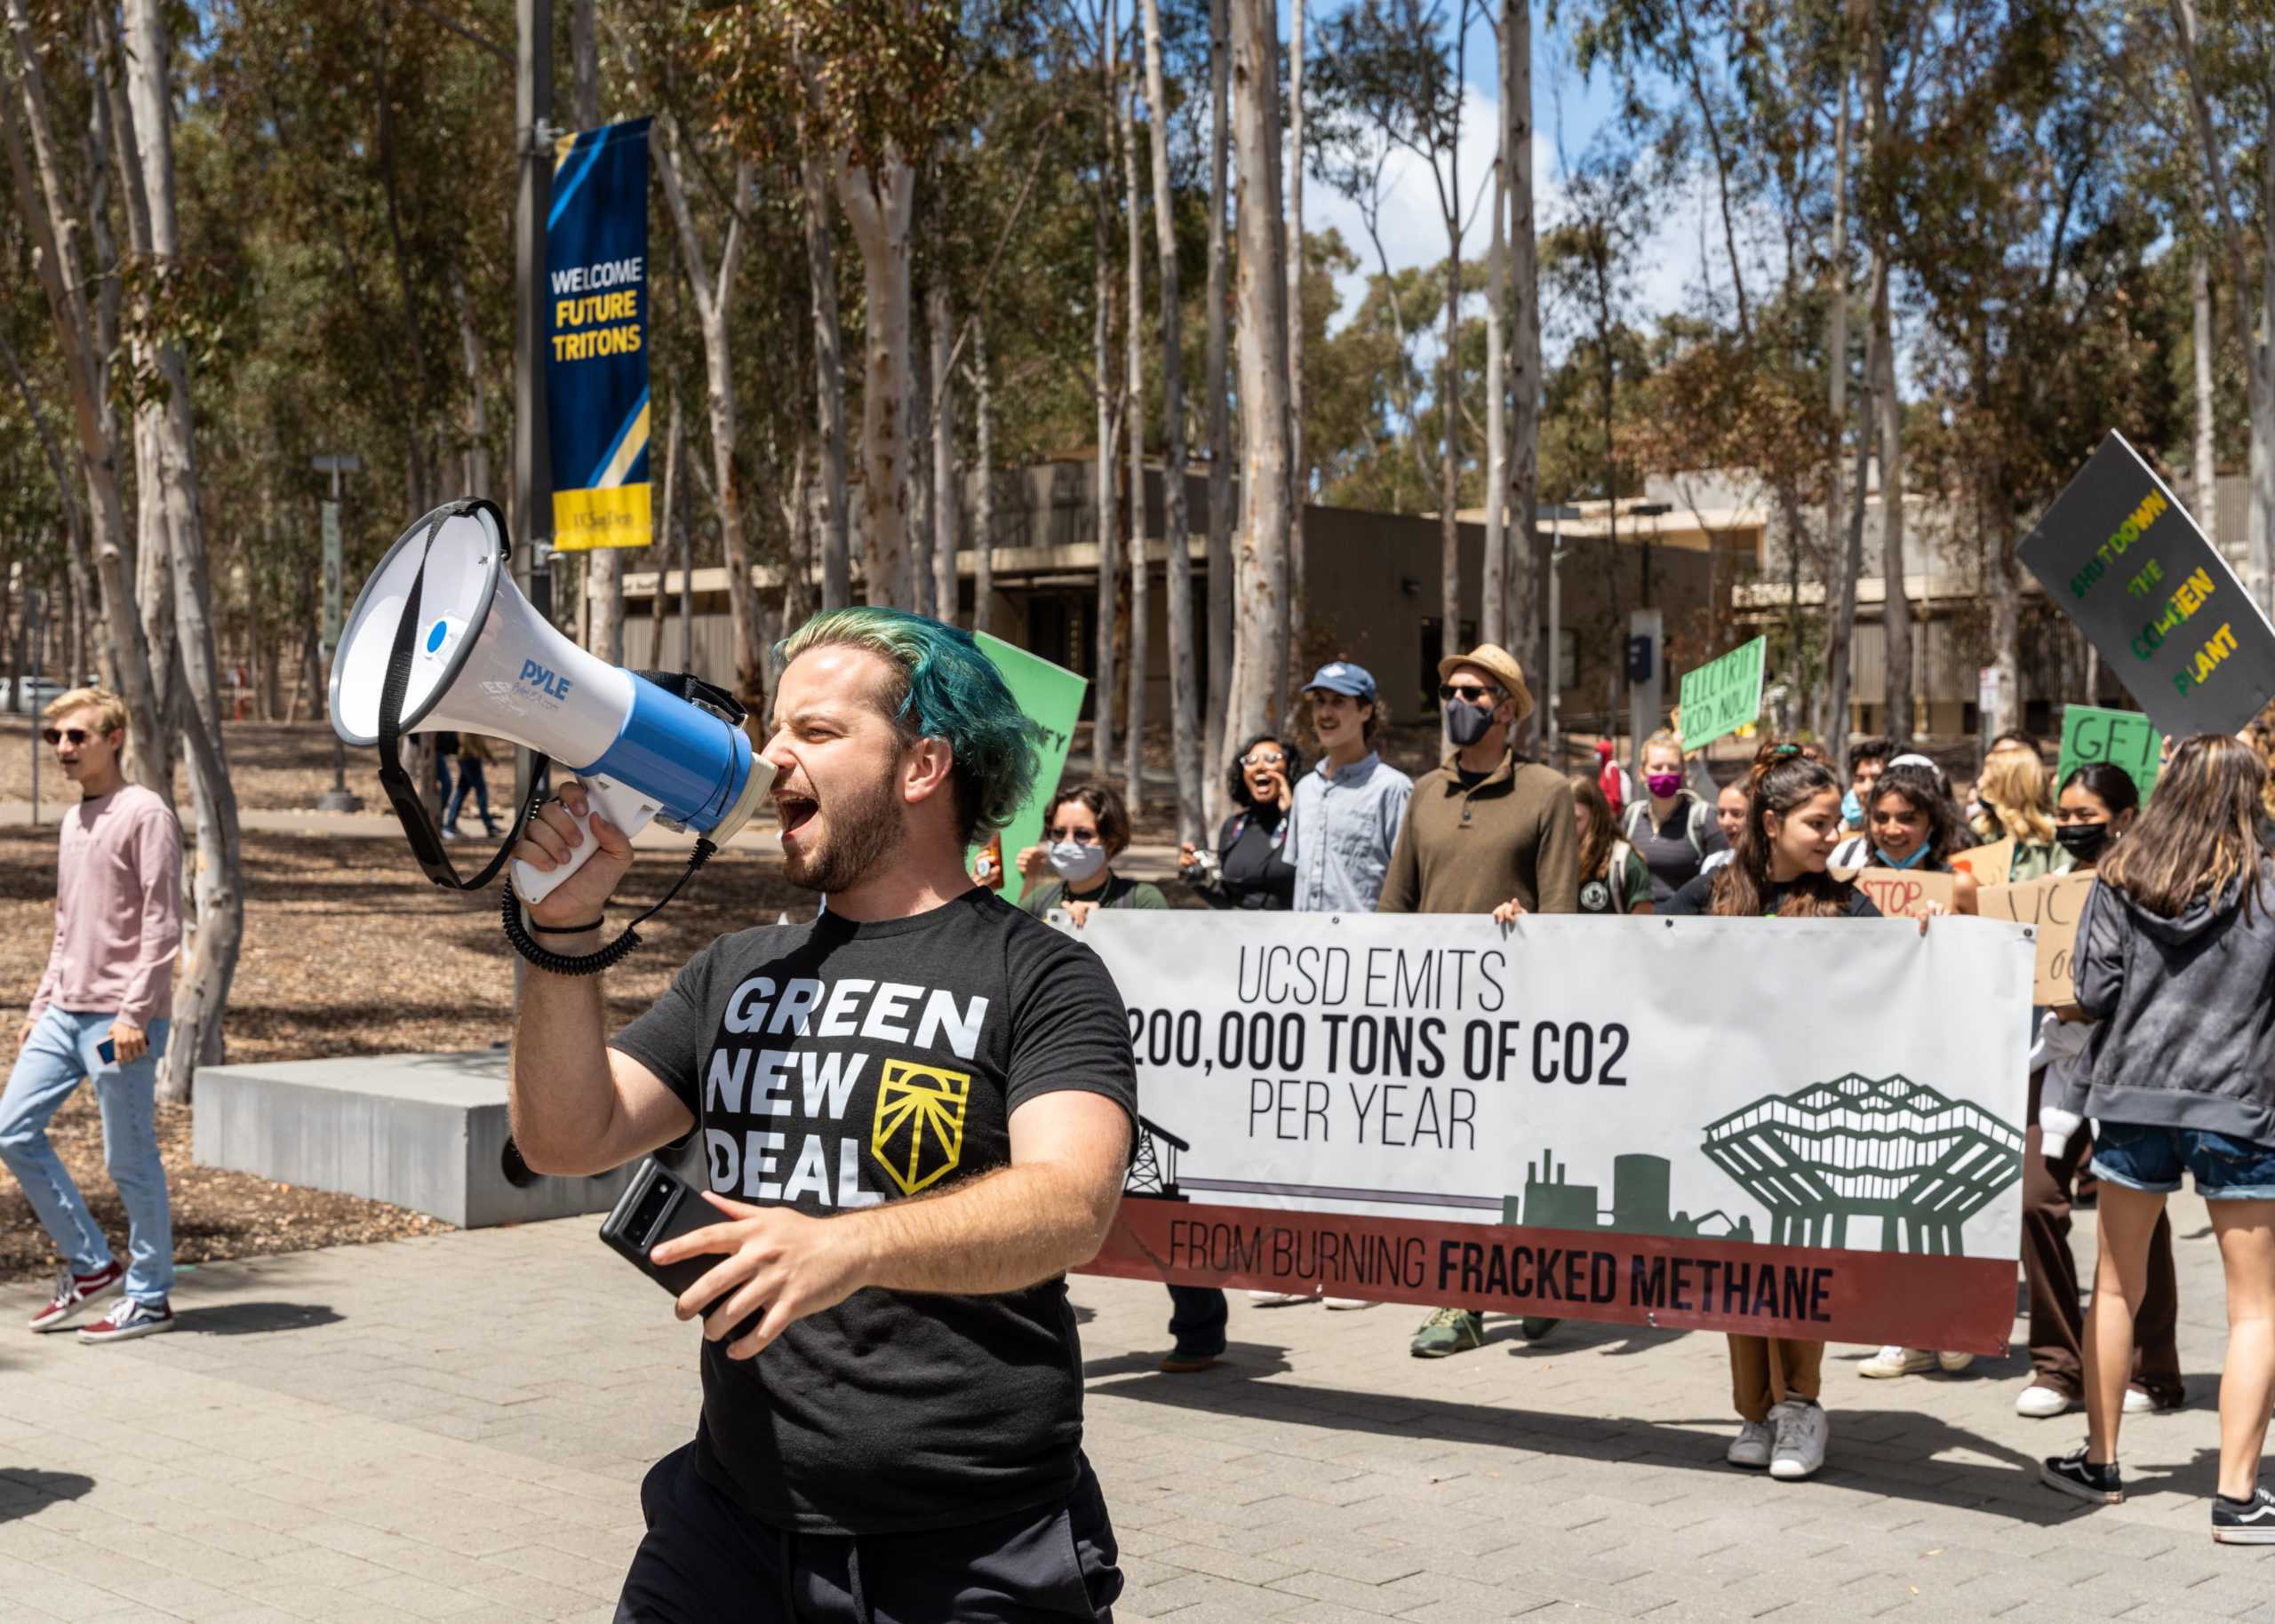 Tritons Gather in Earth Day Rally Against University of California Fossil Fuel Use